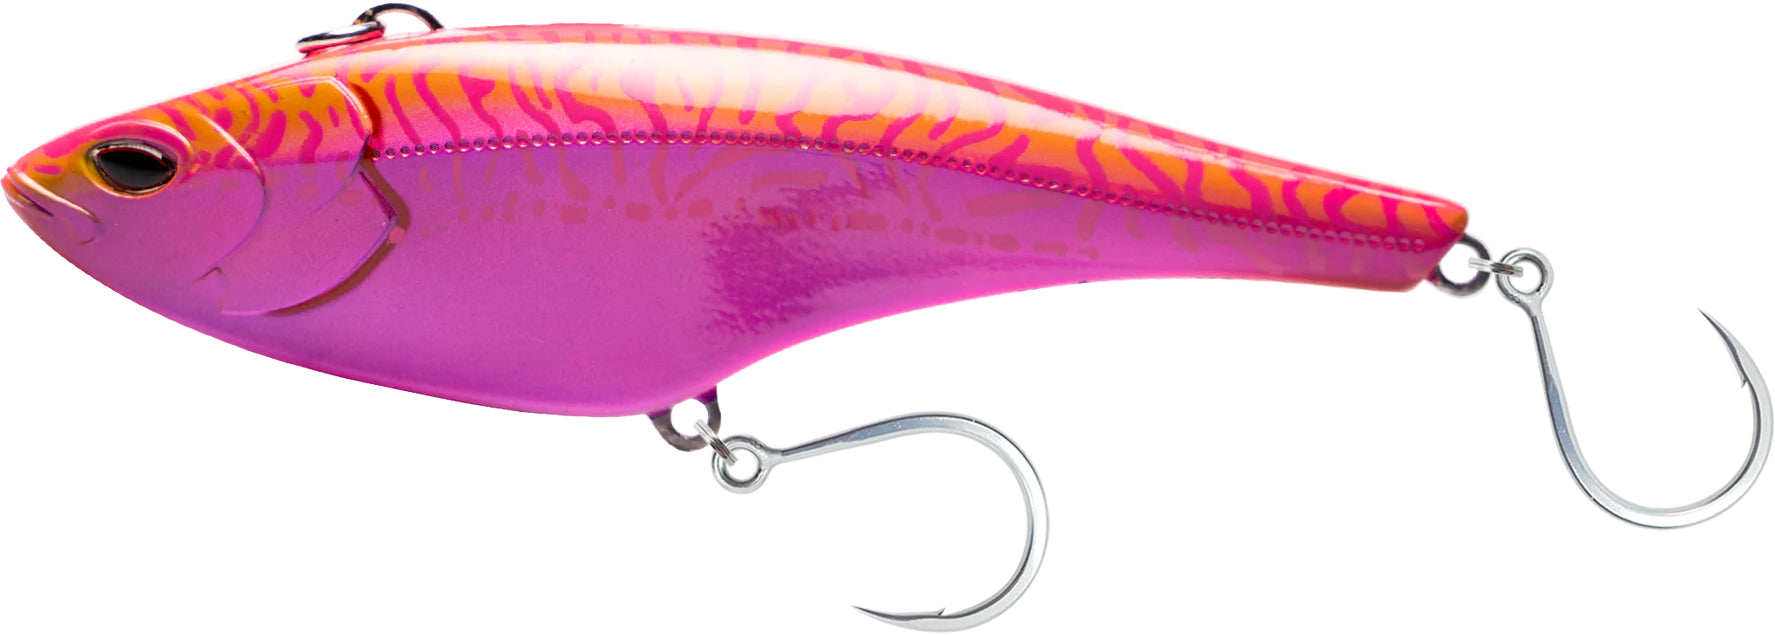 Nomad Design Madmacs Sinking High Speed Lure - Pink Lava 160, 6